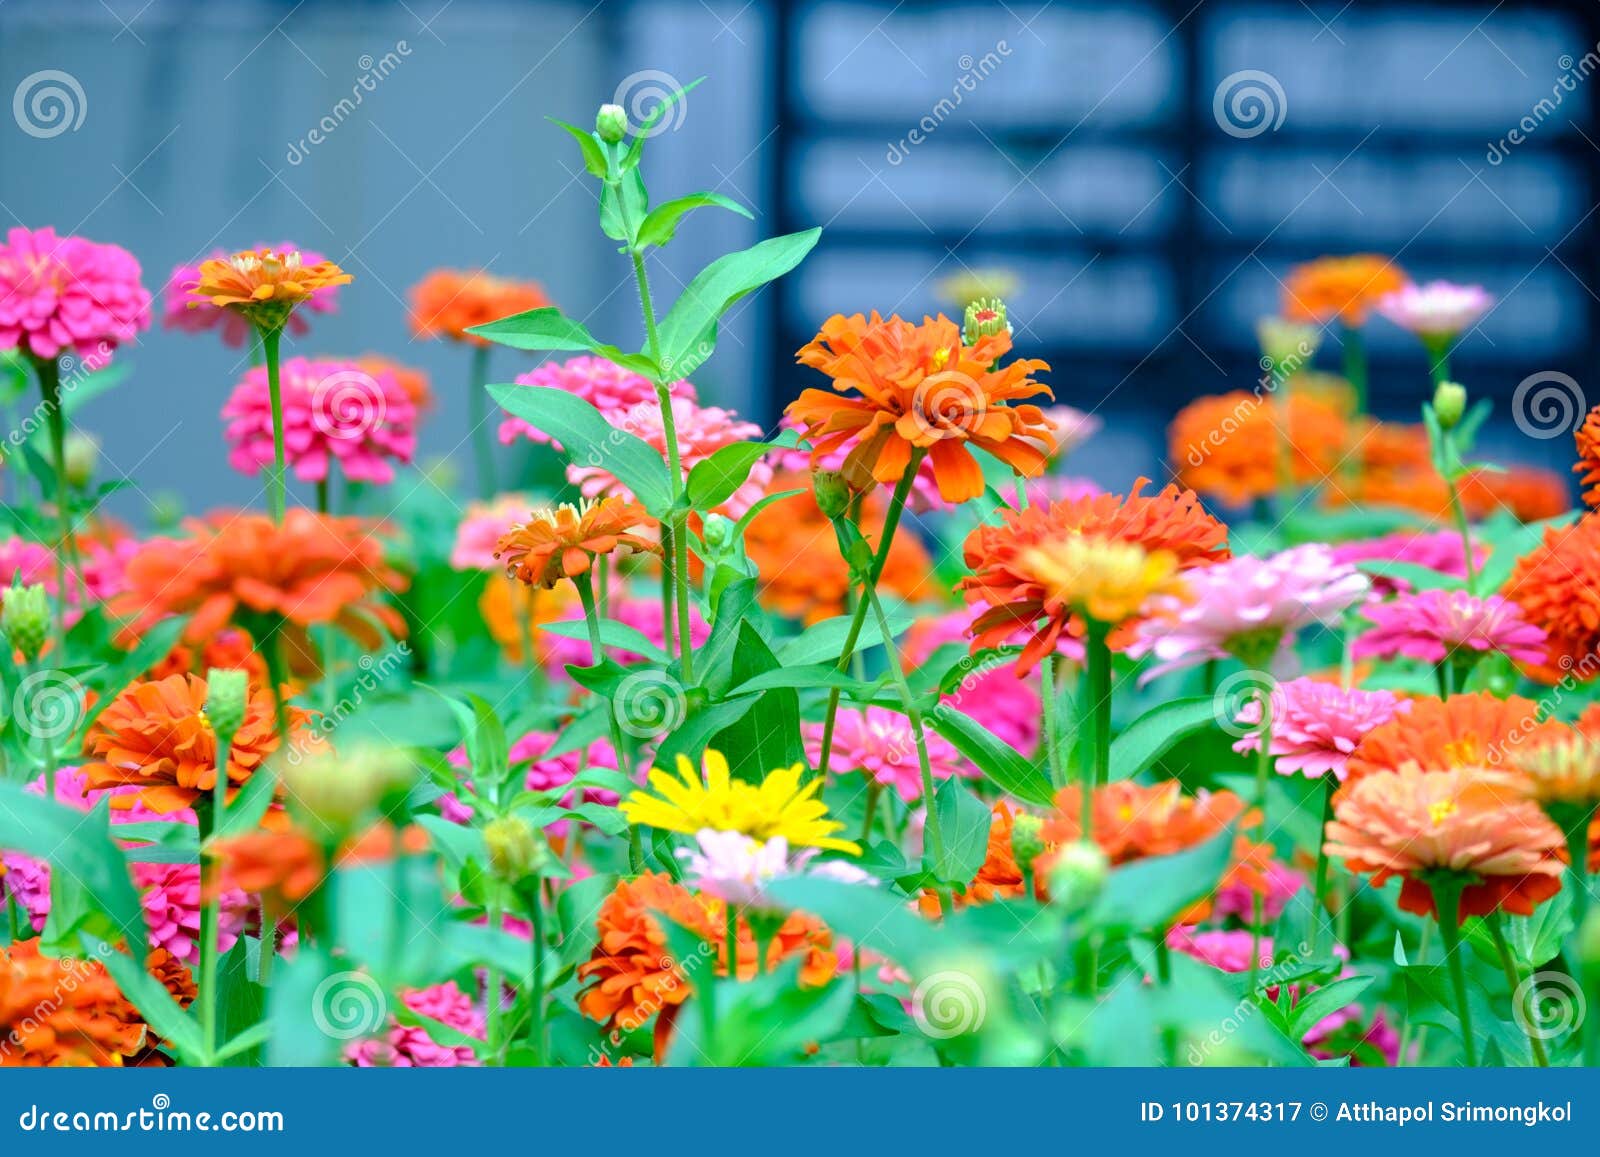 Beautiful Zinnia Flowers Are Blooming In Garden Stock Image Image Of Park Nature 101374317